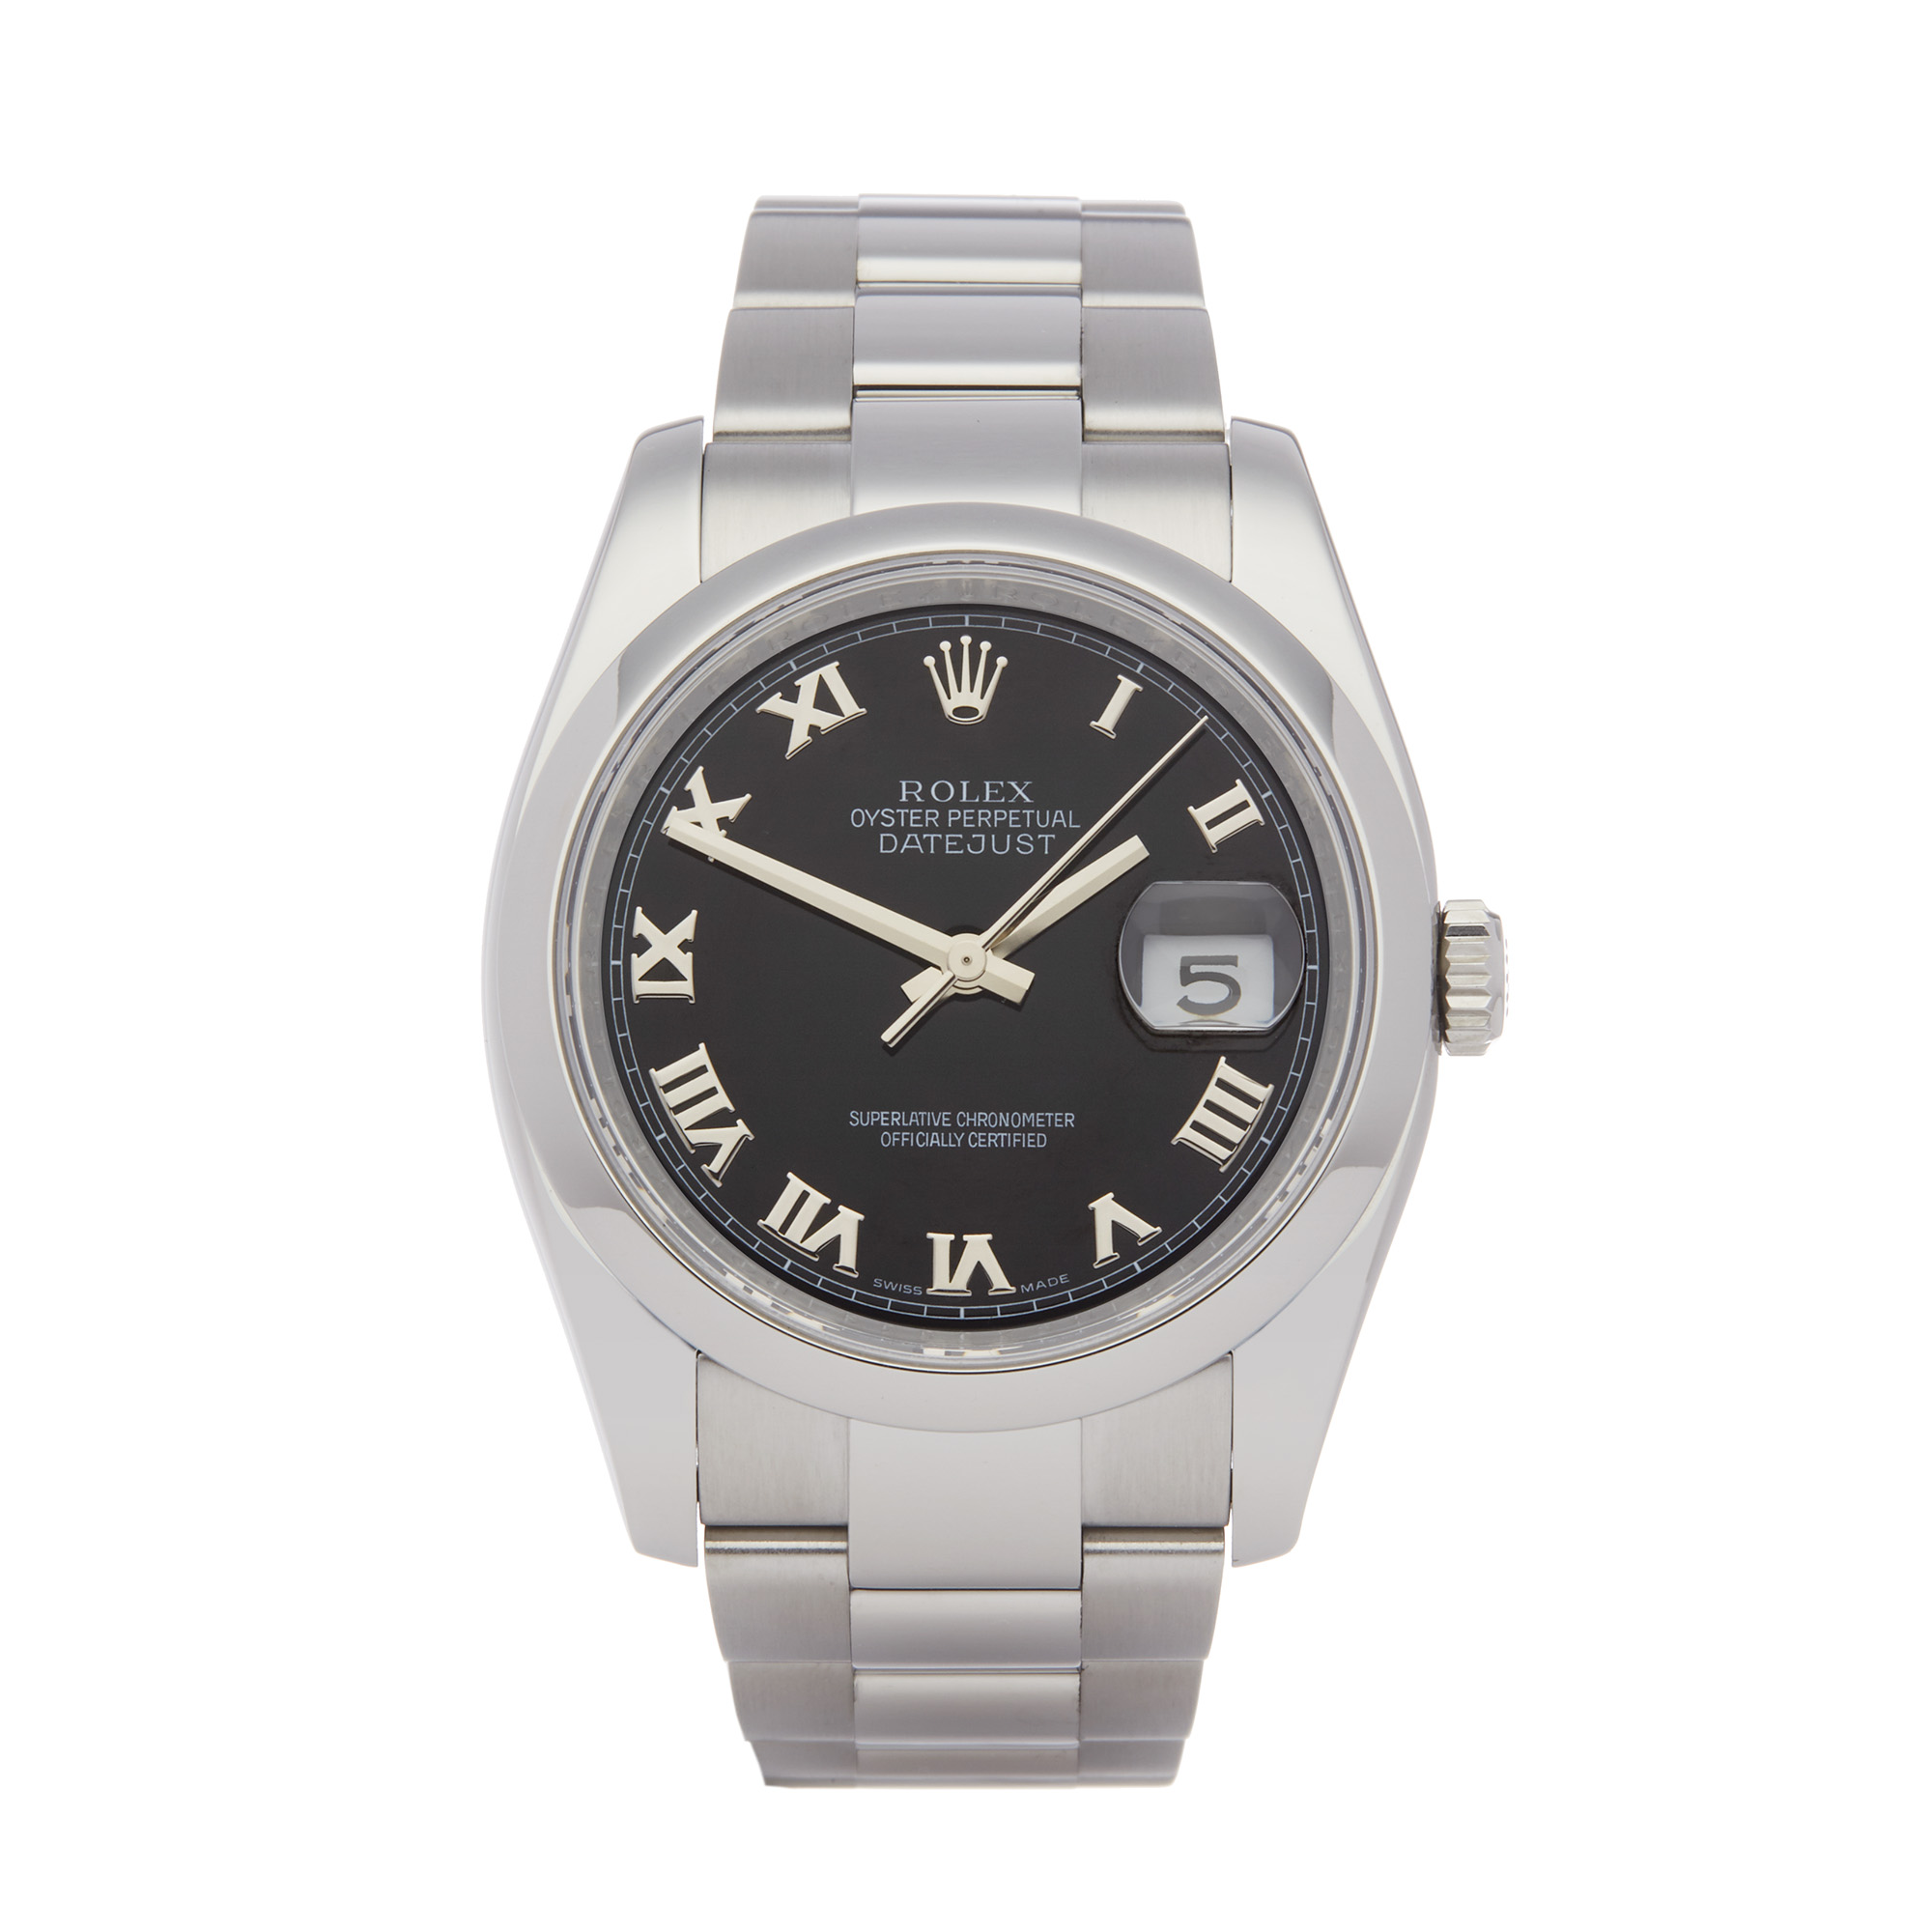 Rolex Datejust 36 116200 Men's Stainless Steel Watch - Image 9 of 9